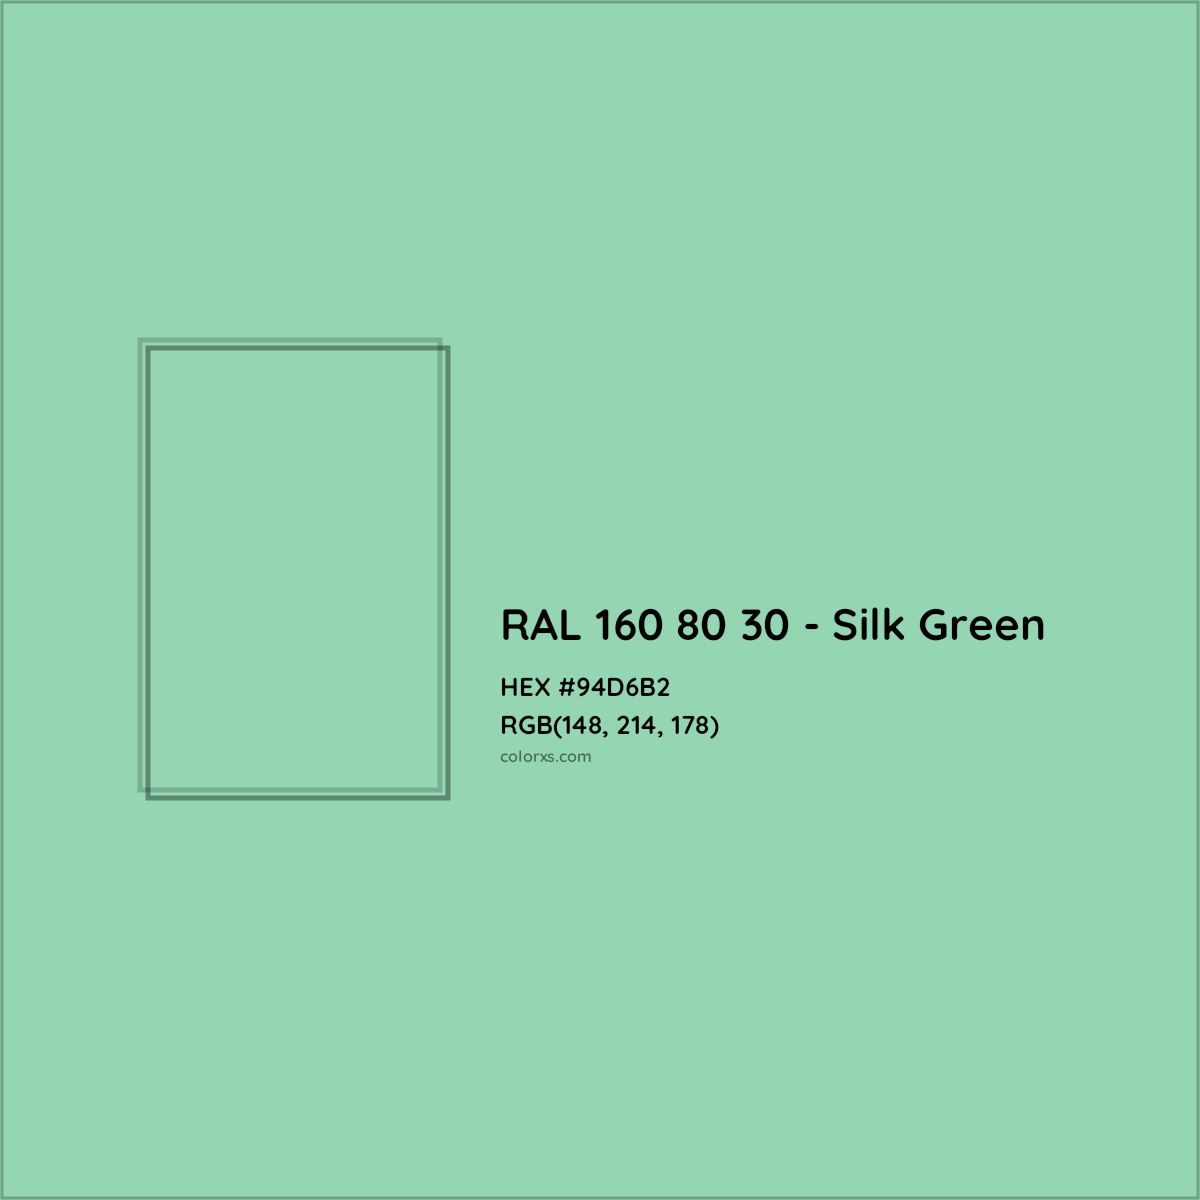 HEX #94D6B2 RAL 160 80 30 - Silk Green CMS RAL Design - Color Code